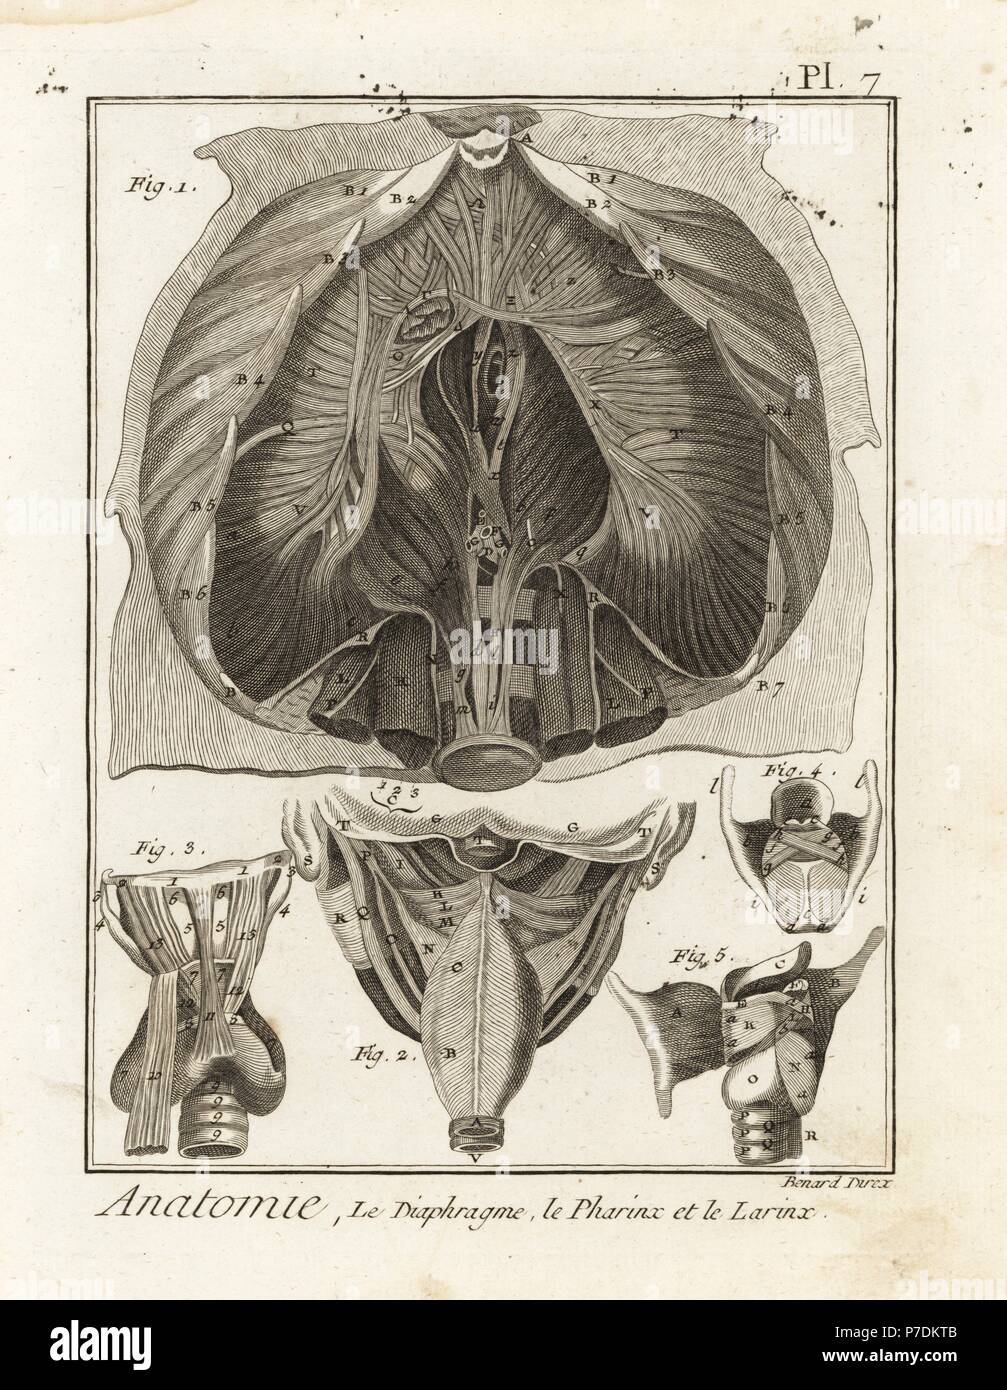 Dissection of the human diaphragm, chest cavity, and details of the pharynx and larynx. Copperplate engraving by Robert Benard after an illustration by Albrecht von Haller from Denis Diderot's Encyclopedia, Pellet, Geneva, 1779. Stock Photo